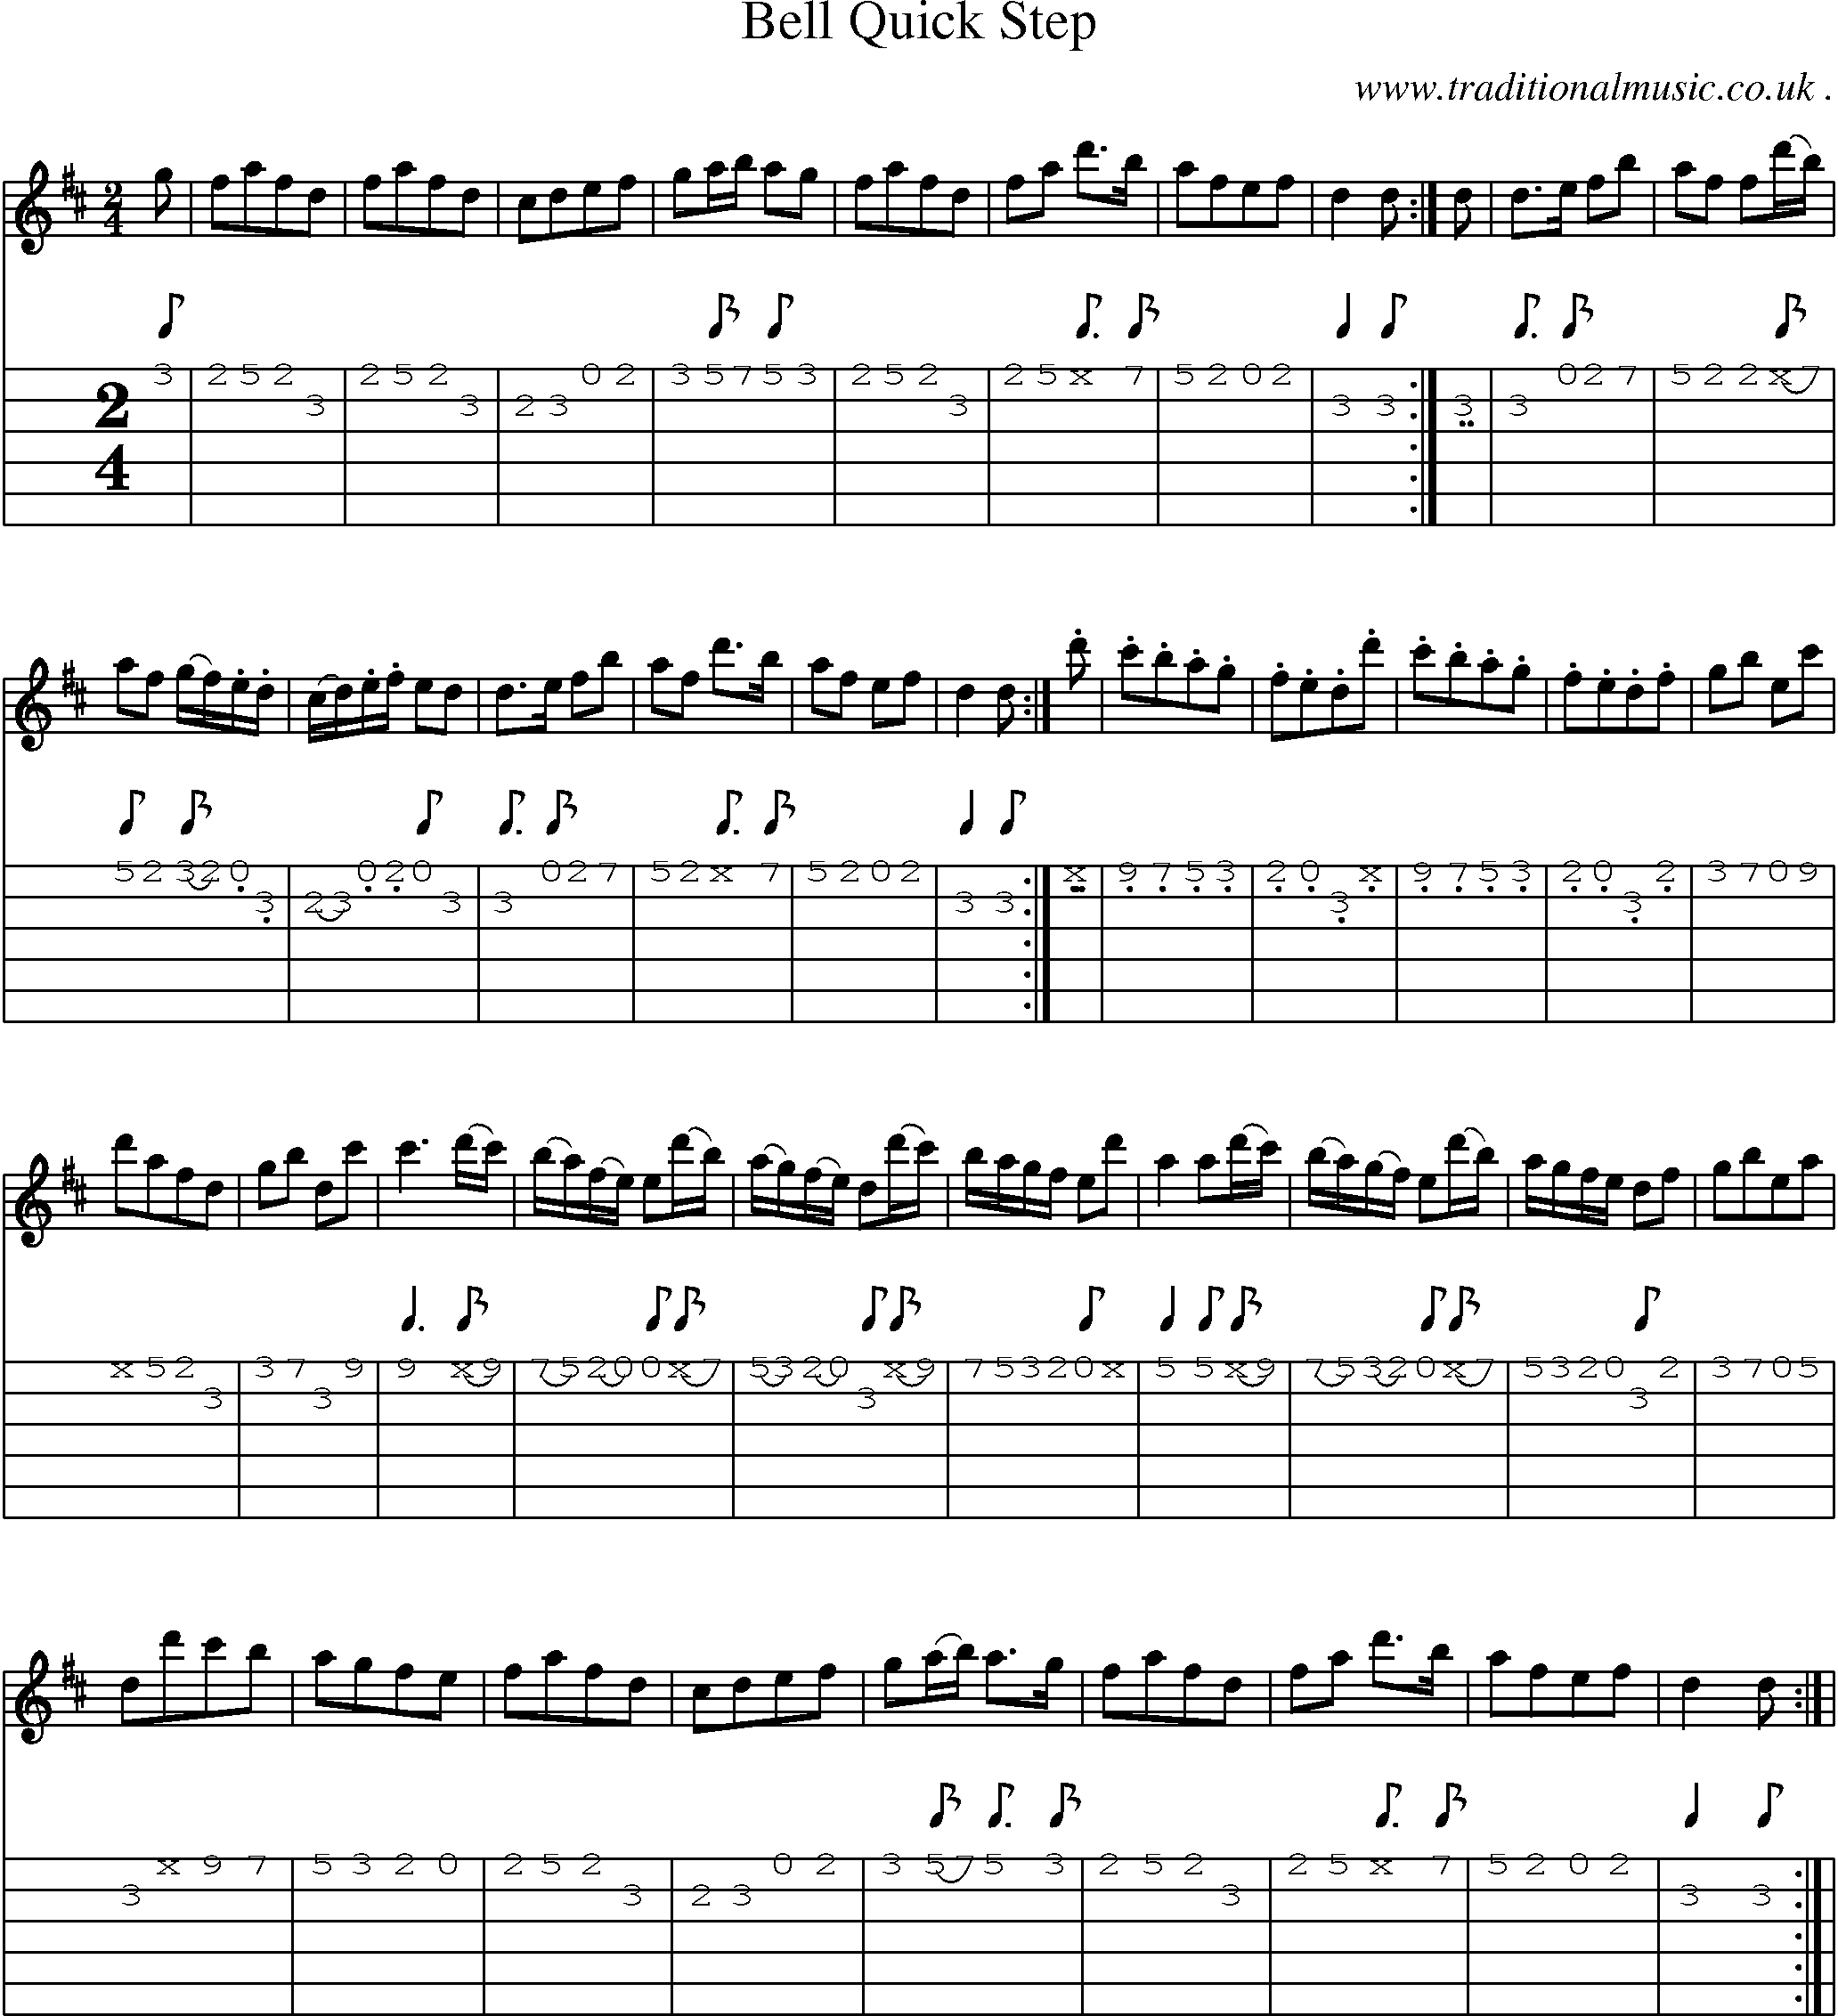 Sheet-Music and Guitar Tabs for Bell Quick Step